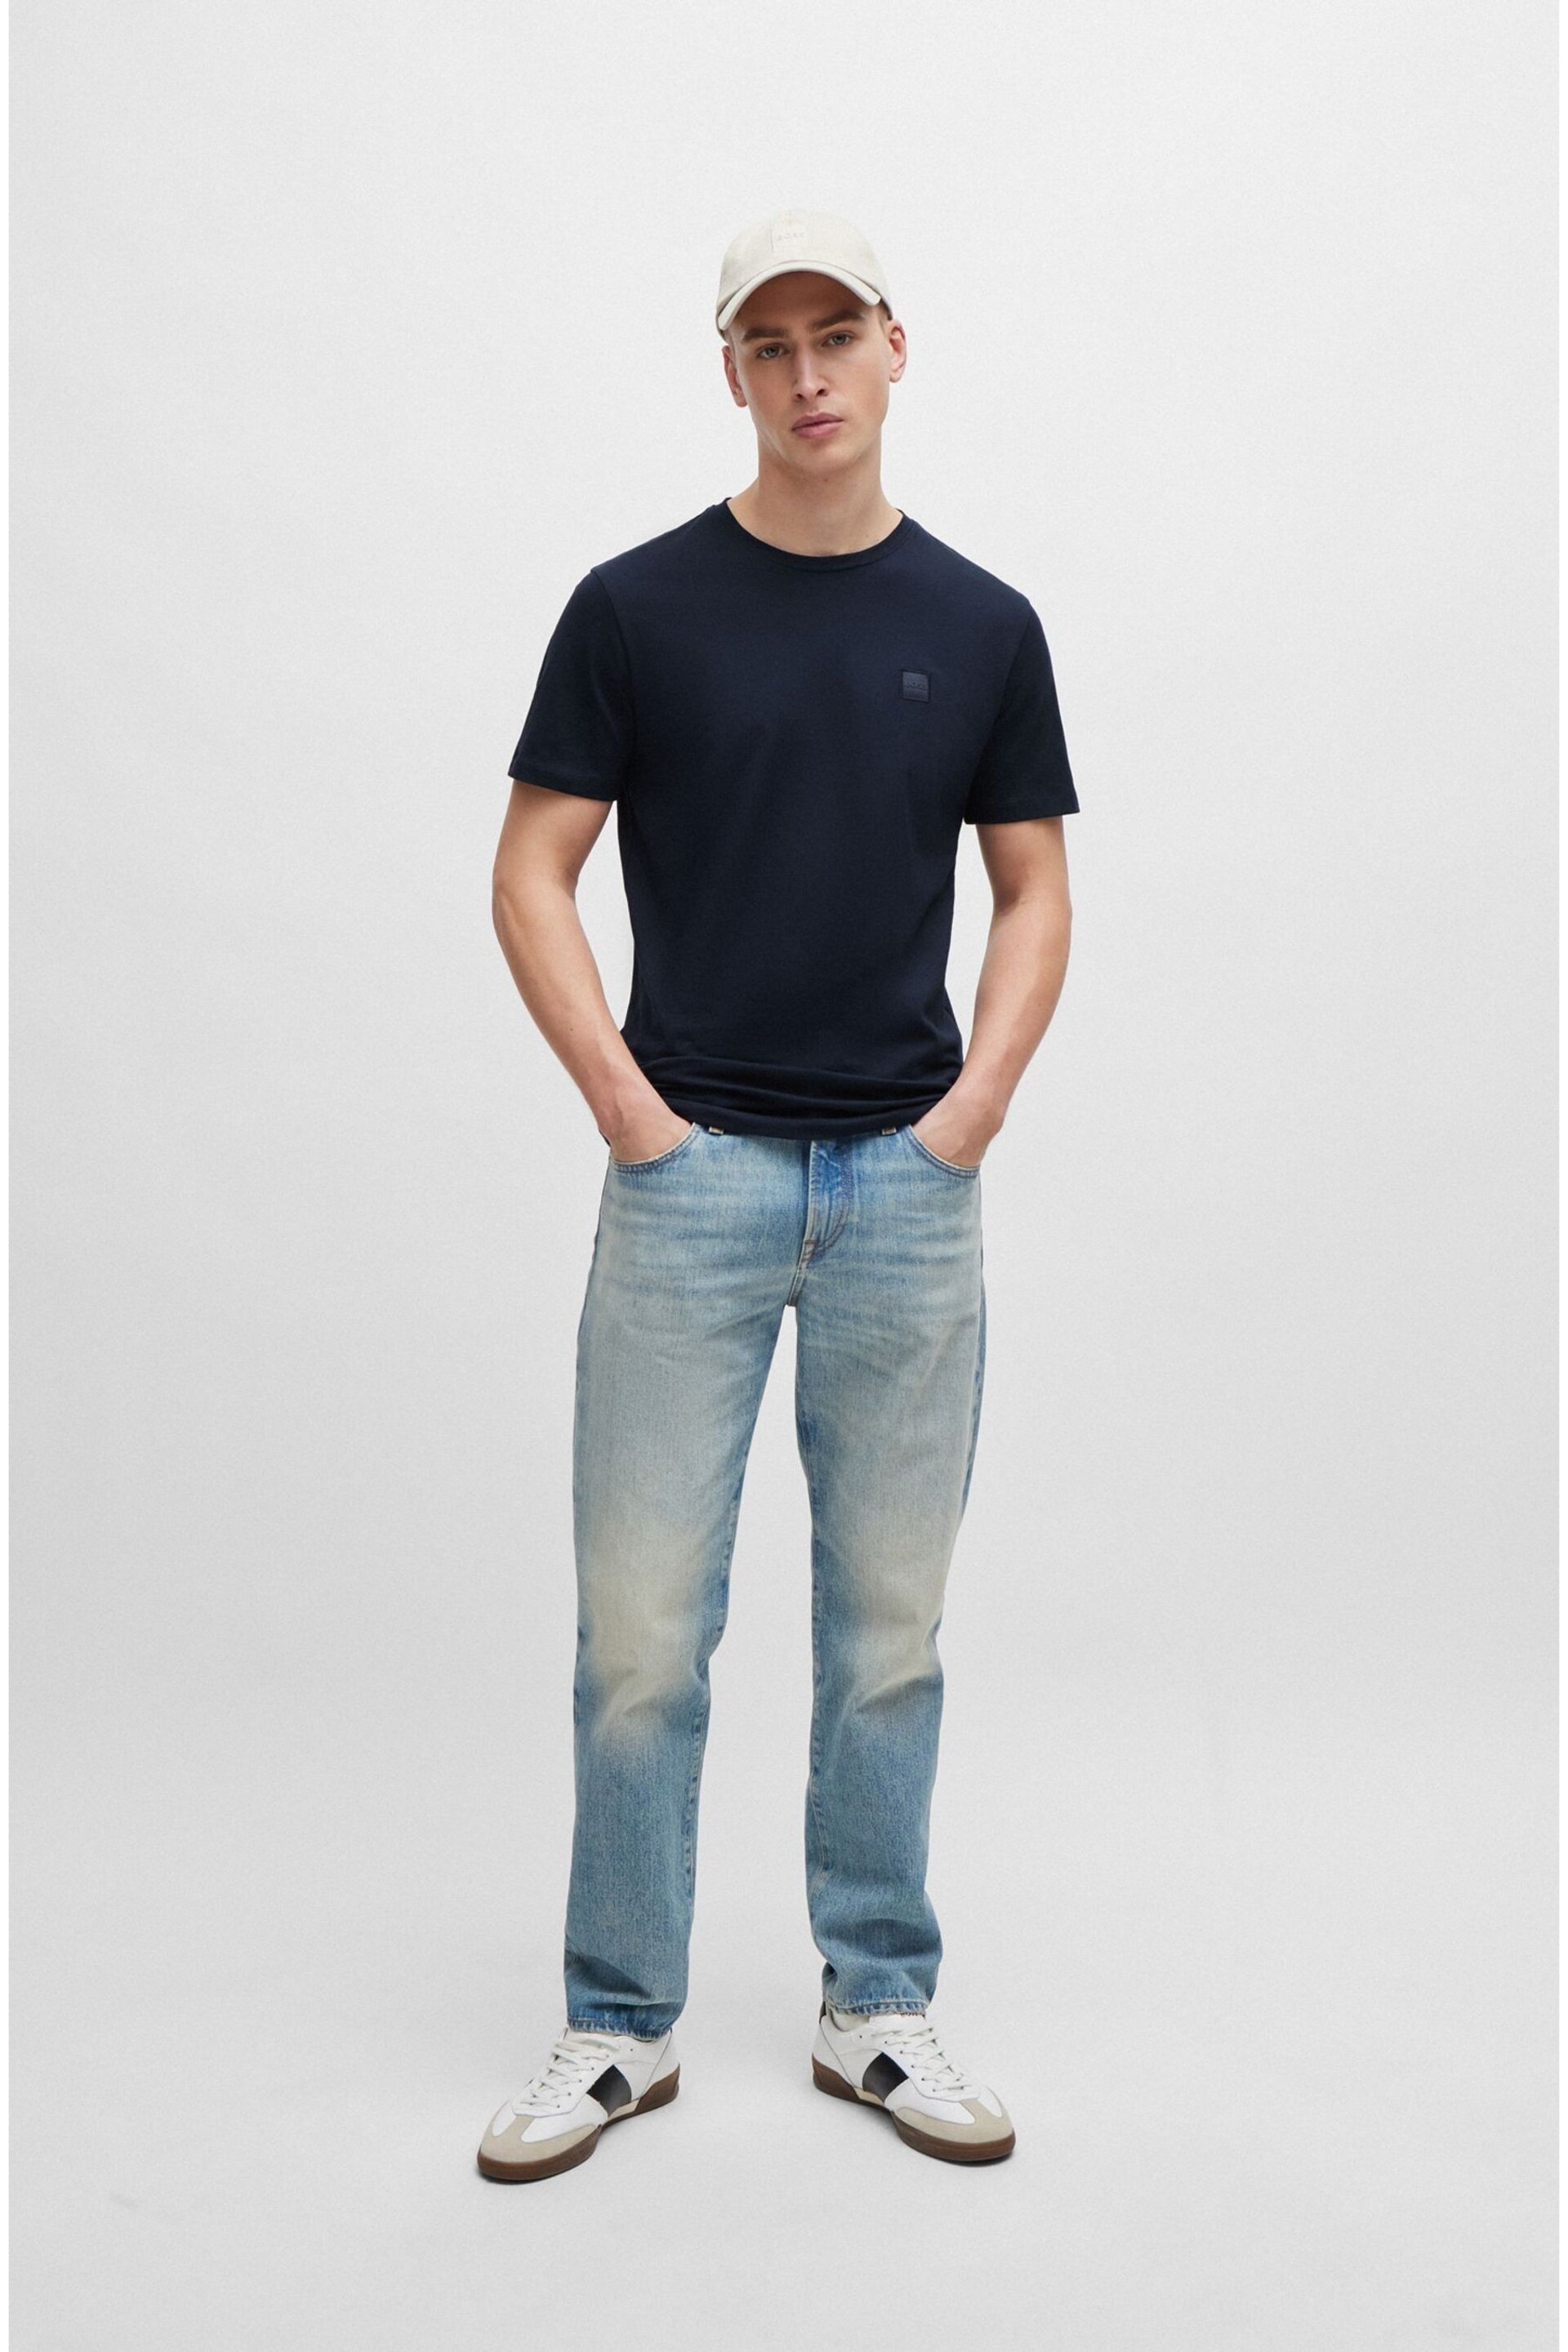 BOSS Dark Blue Relaxed Fit Box Logo T-Shirt - Image 3 of 5